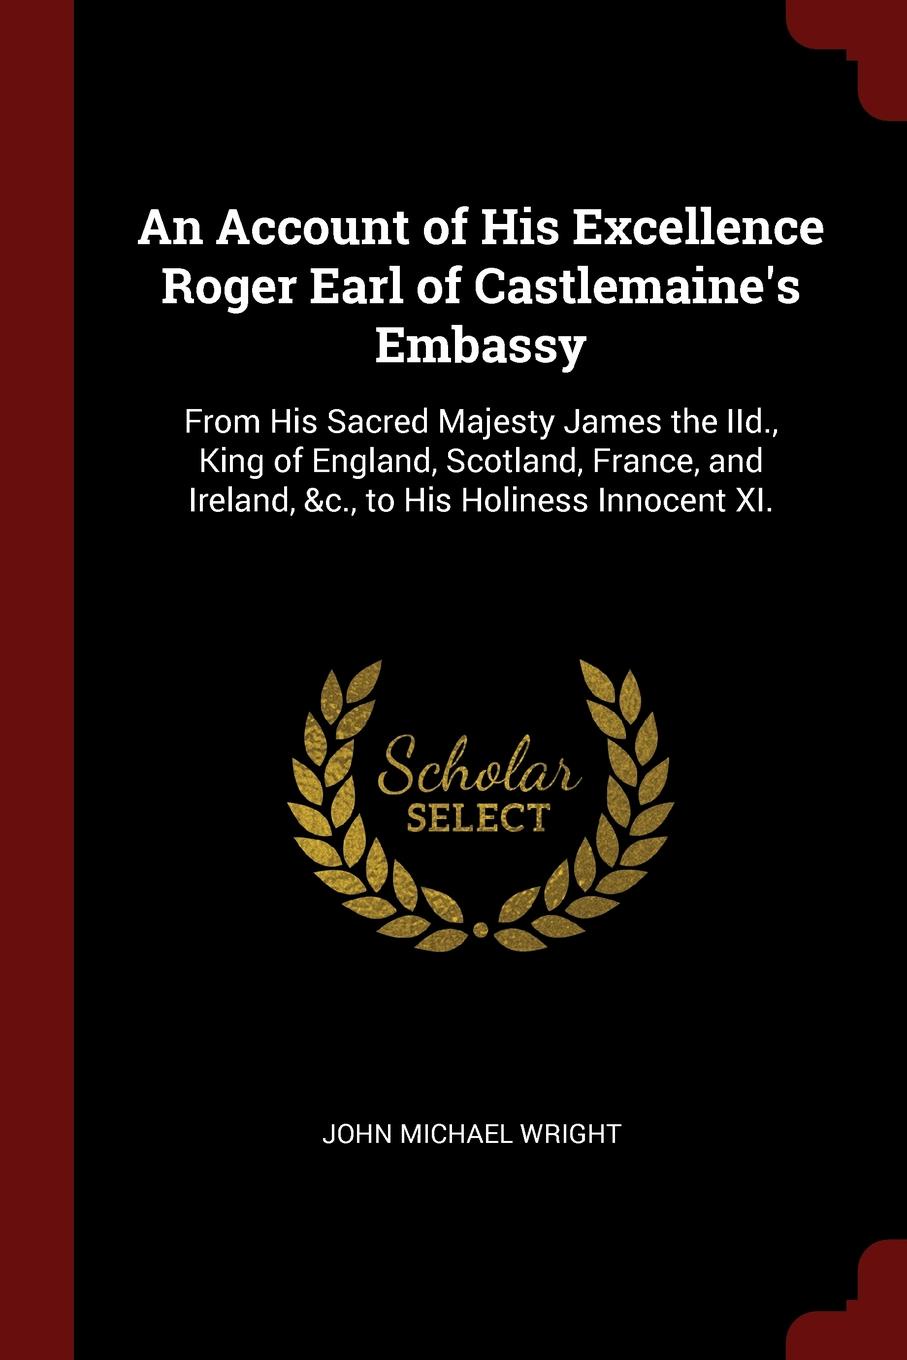 An Account of His Excellence Roger Earl of Castlemaine.s Embassy. From His Sacred Majesty James the IId., King of England, Scotland, France, and Ireland, .c., to His Holiness Innocent XI.